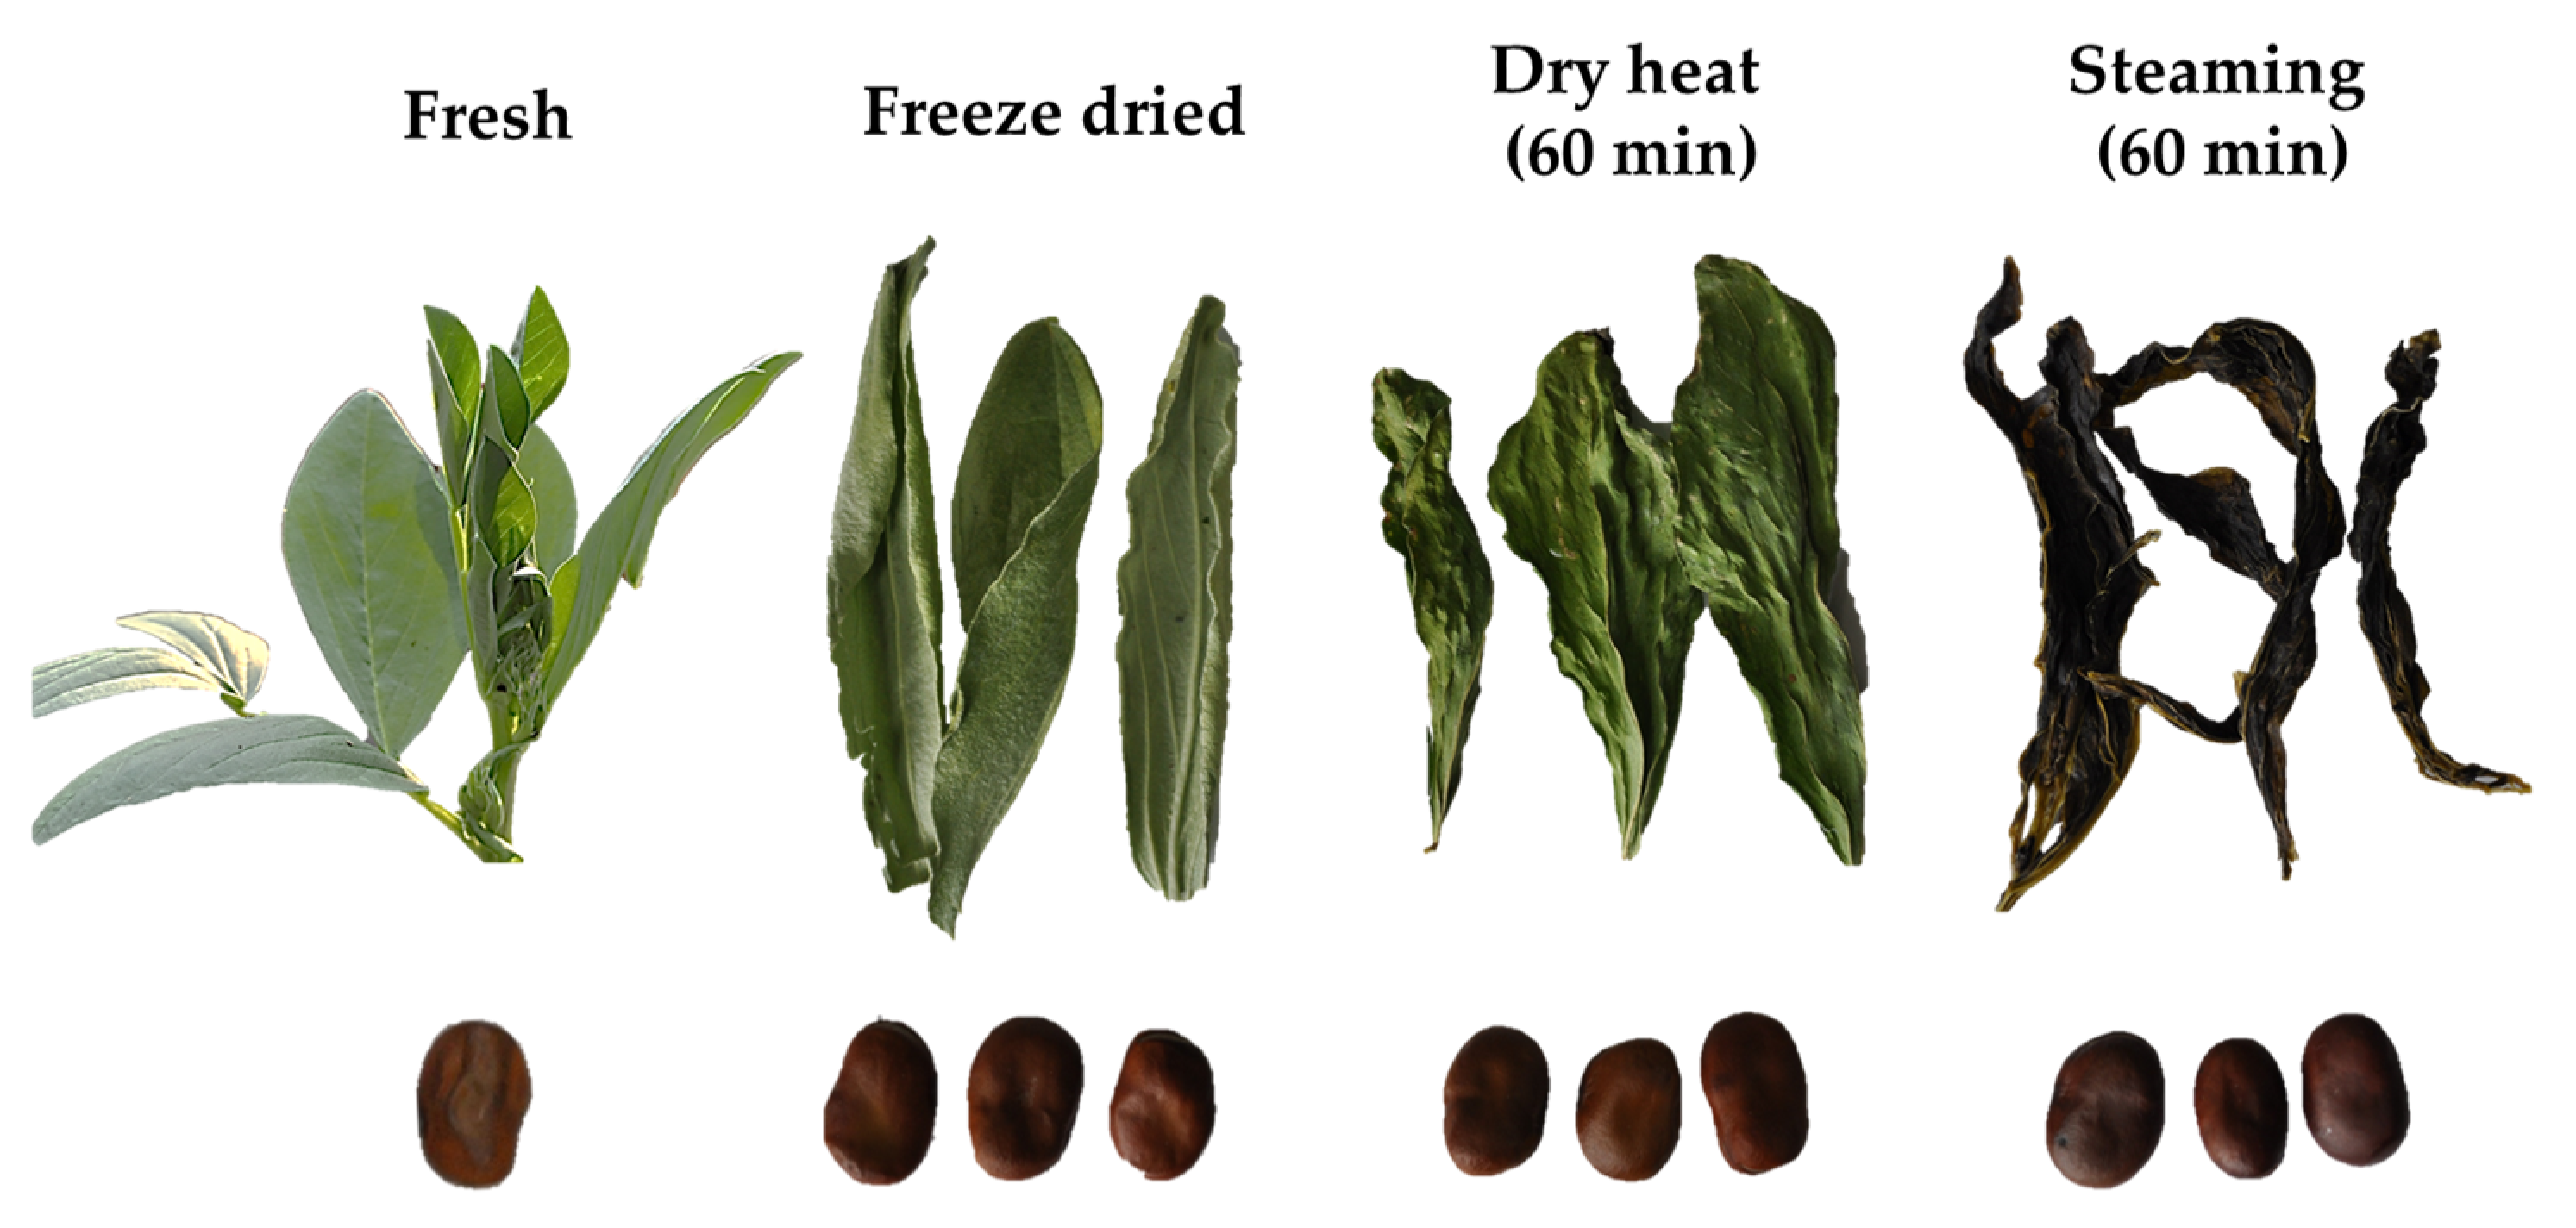 Kilauea Mountain Stuepige andrageren Antioxidants | Free Full-Text | Effect of Thermal Processing on Color,  Phenolic Compounds, and Antioxidant Activity of Faba Bean (Vicia faba L.)  Leaves and Seeds